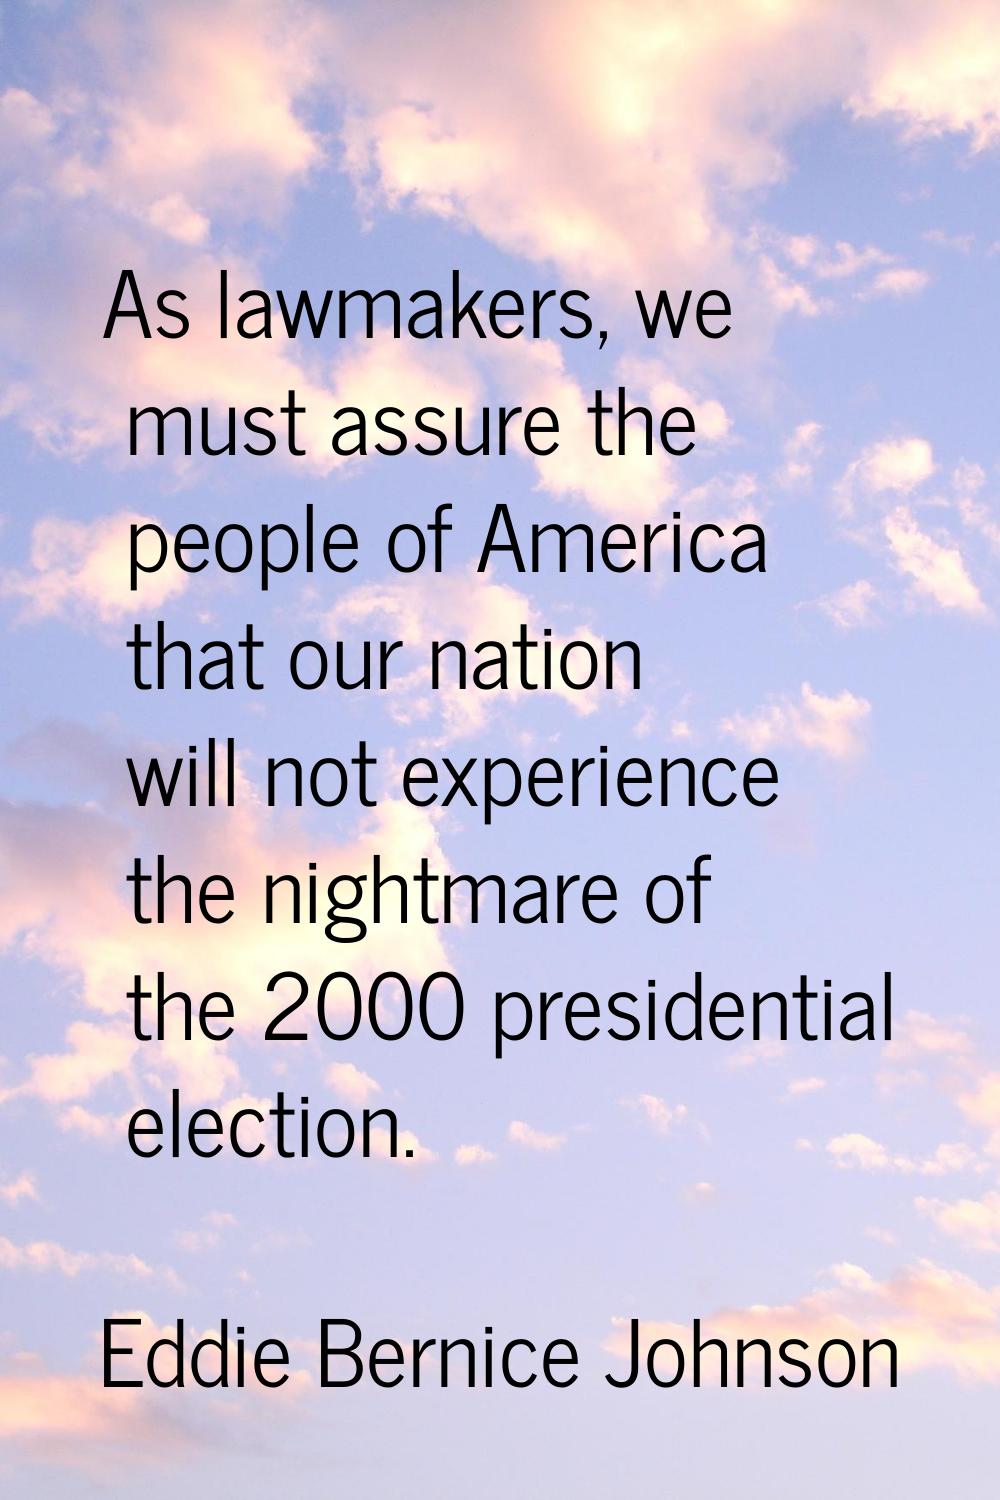 As lawmakers, we must assure the people of America that our nation will not experience the nightmar